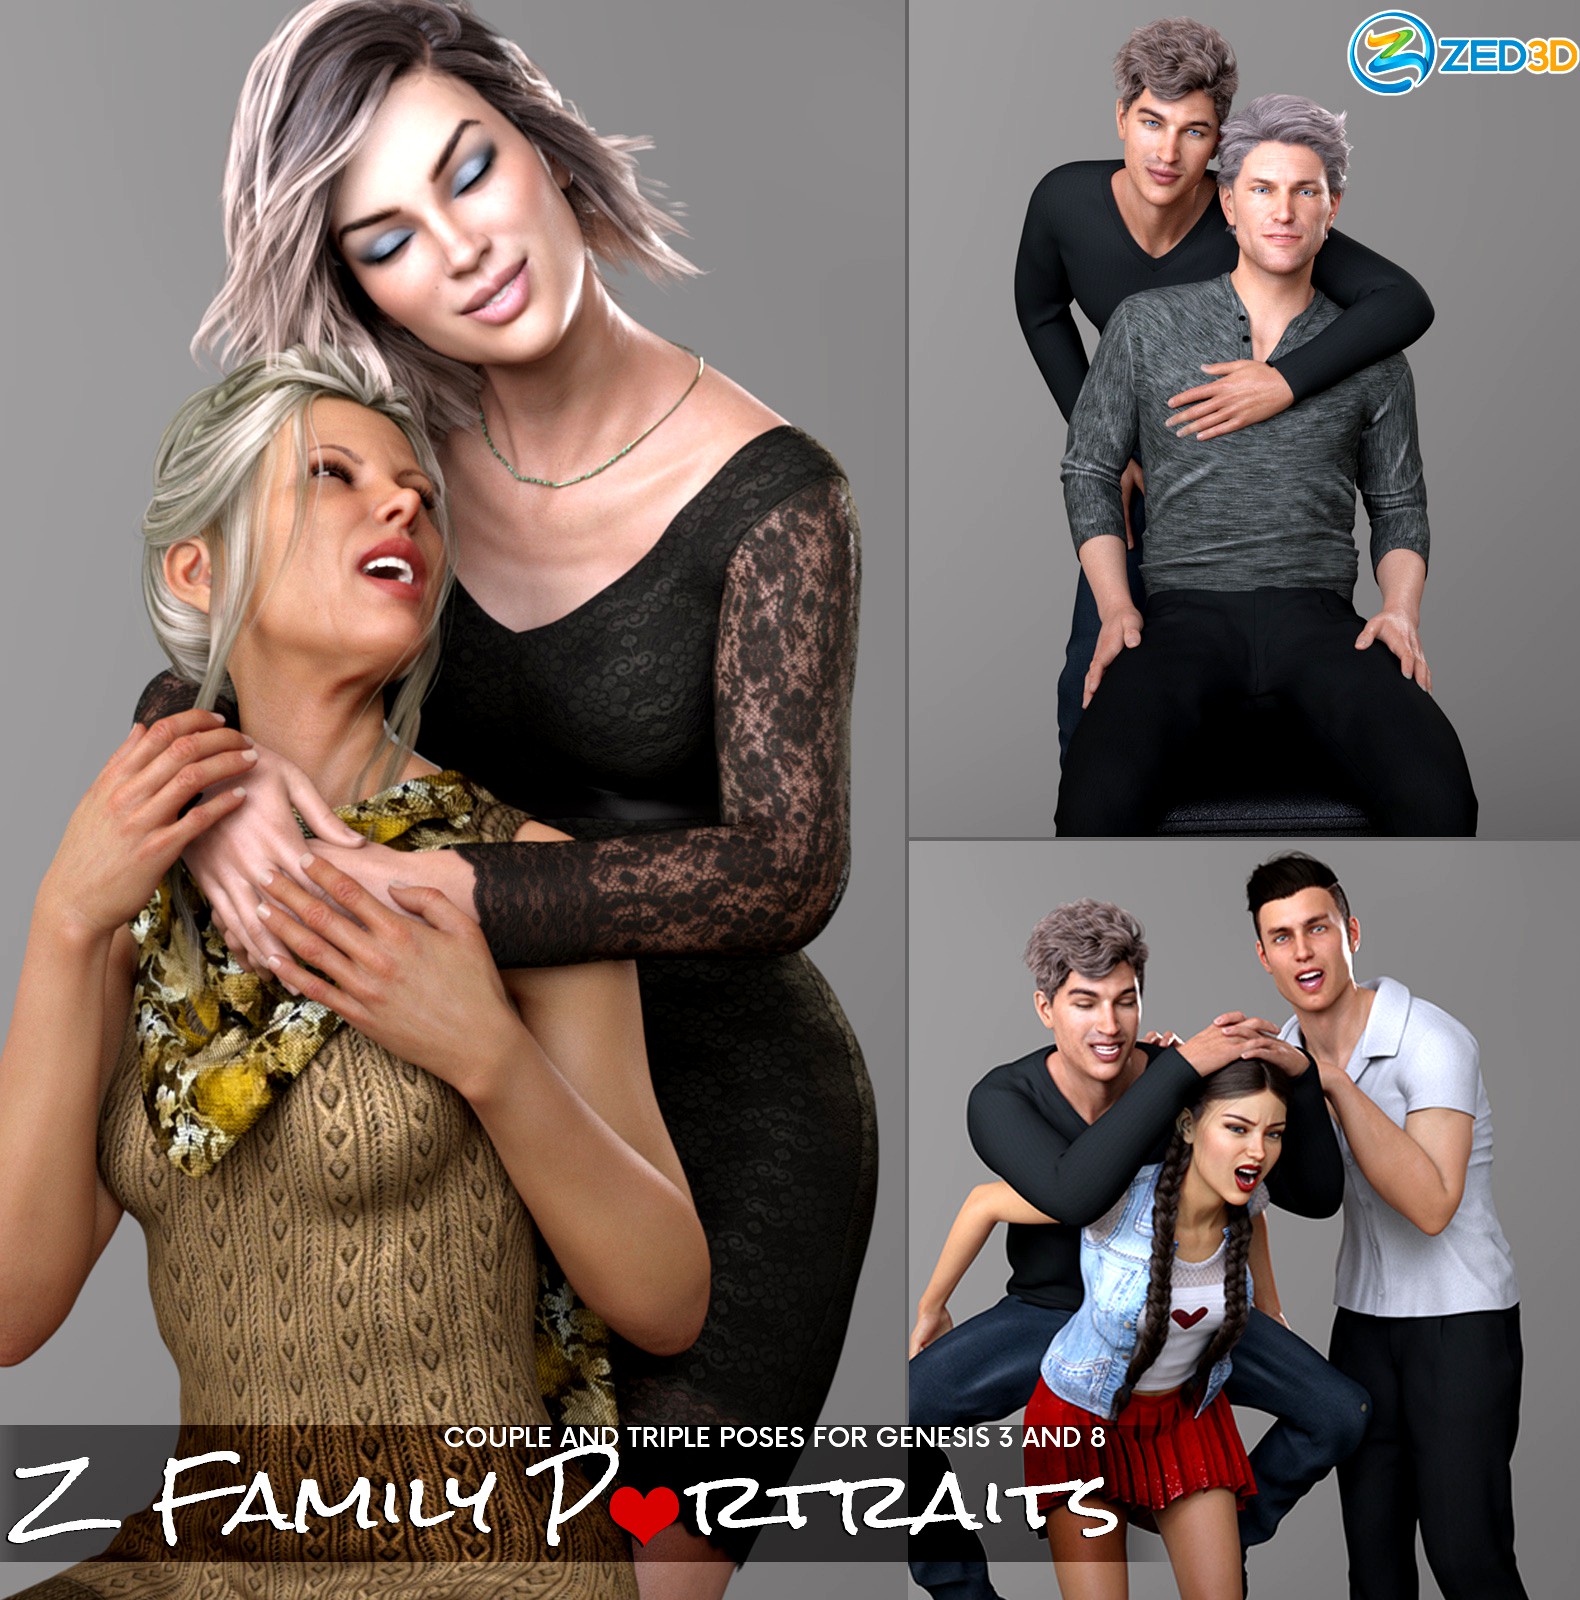 Z Family Portaits - Couple and Triple Poses for Genesis 3 and 8 Male and Female